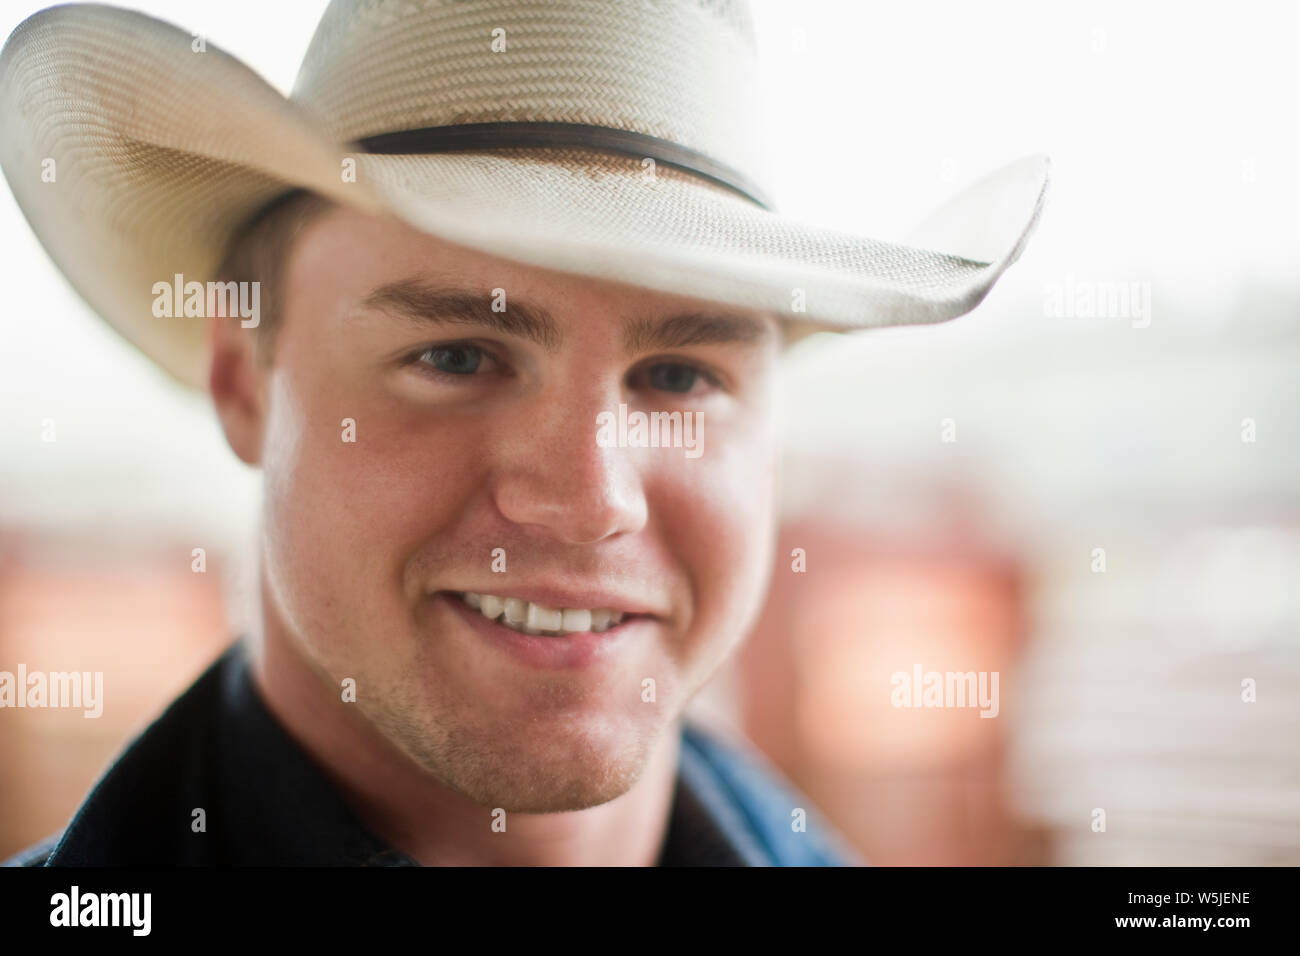 Portrait of young adult cowboy. Stock Photo